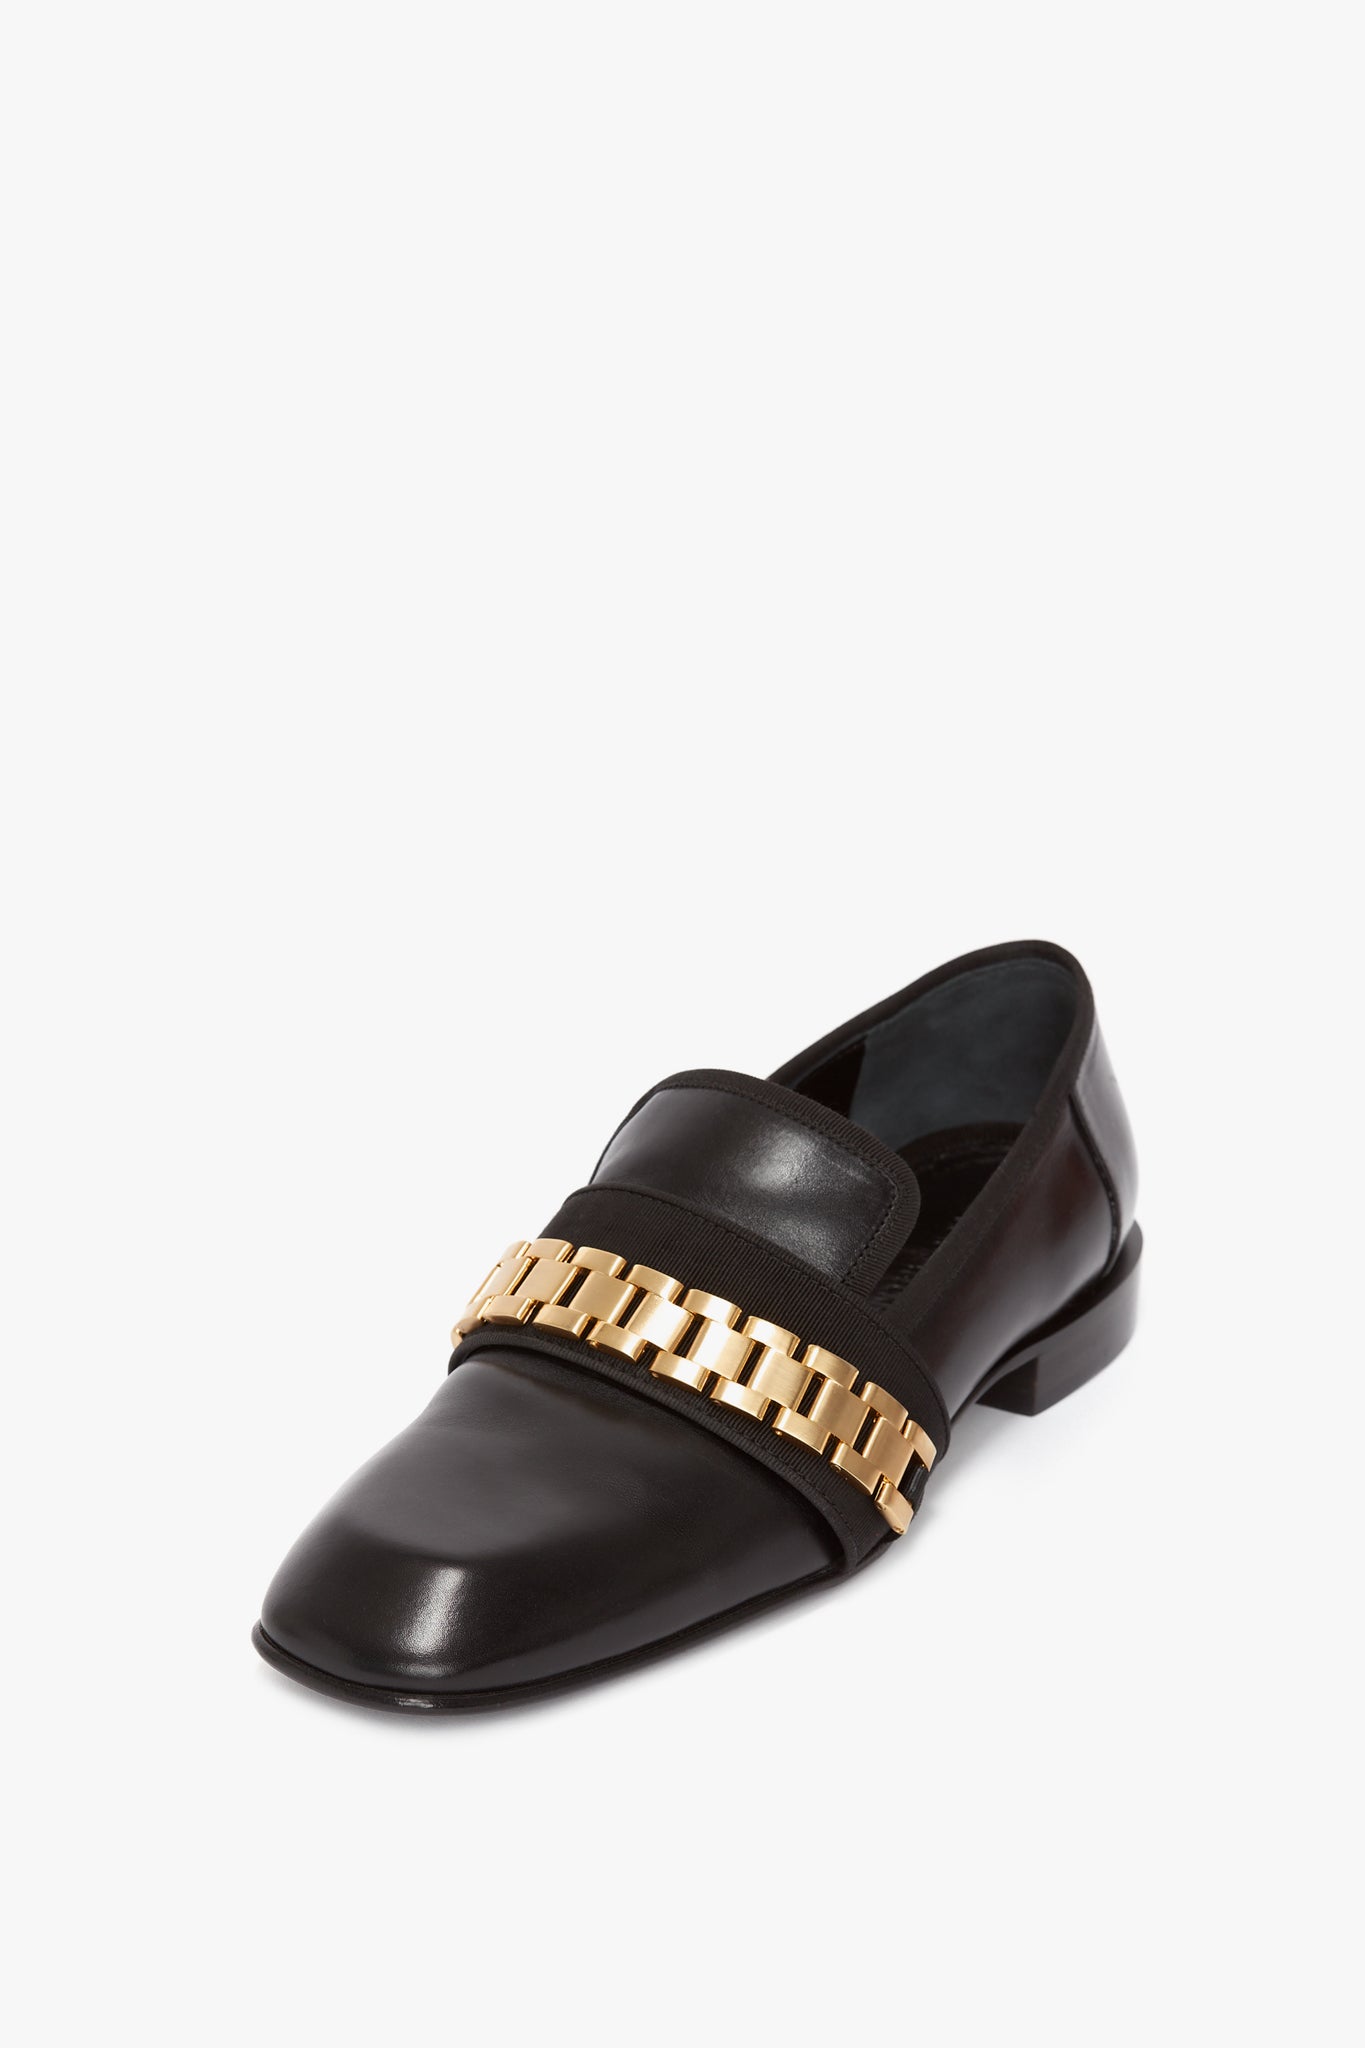 The Mila Chain Loafer In Black by Victoria Beckham, a tuxedo shoe in shiny black patent leather, features a gold chain detail across the top and is elegantly displayed on a white background.